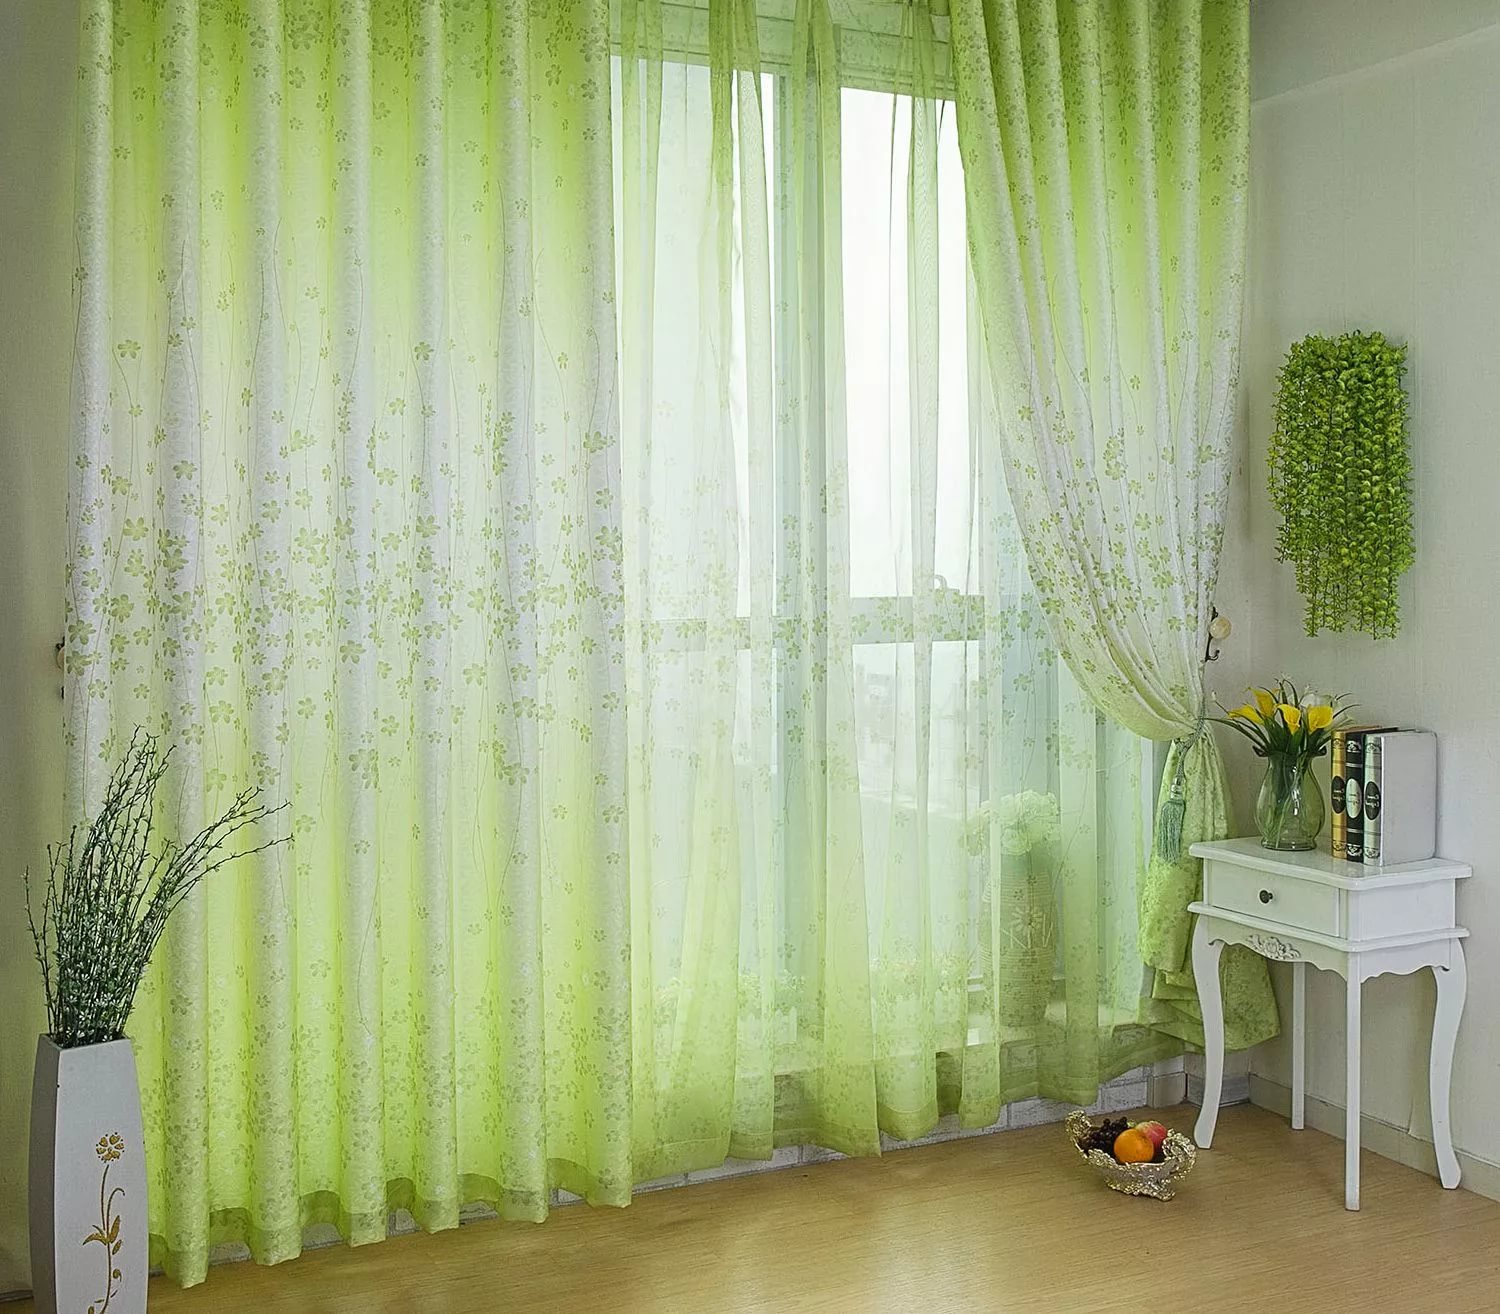 Living room window with greenish sheer curtains